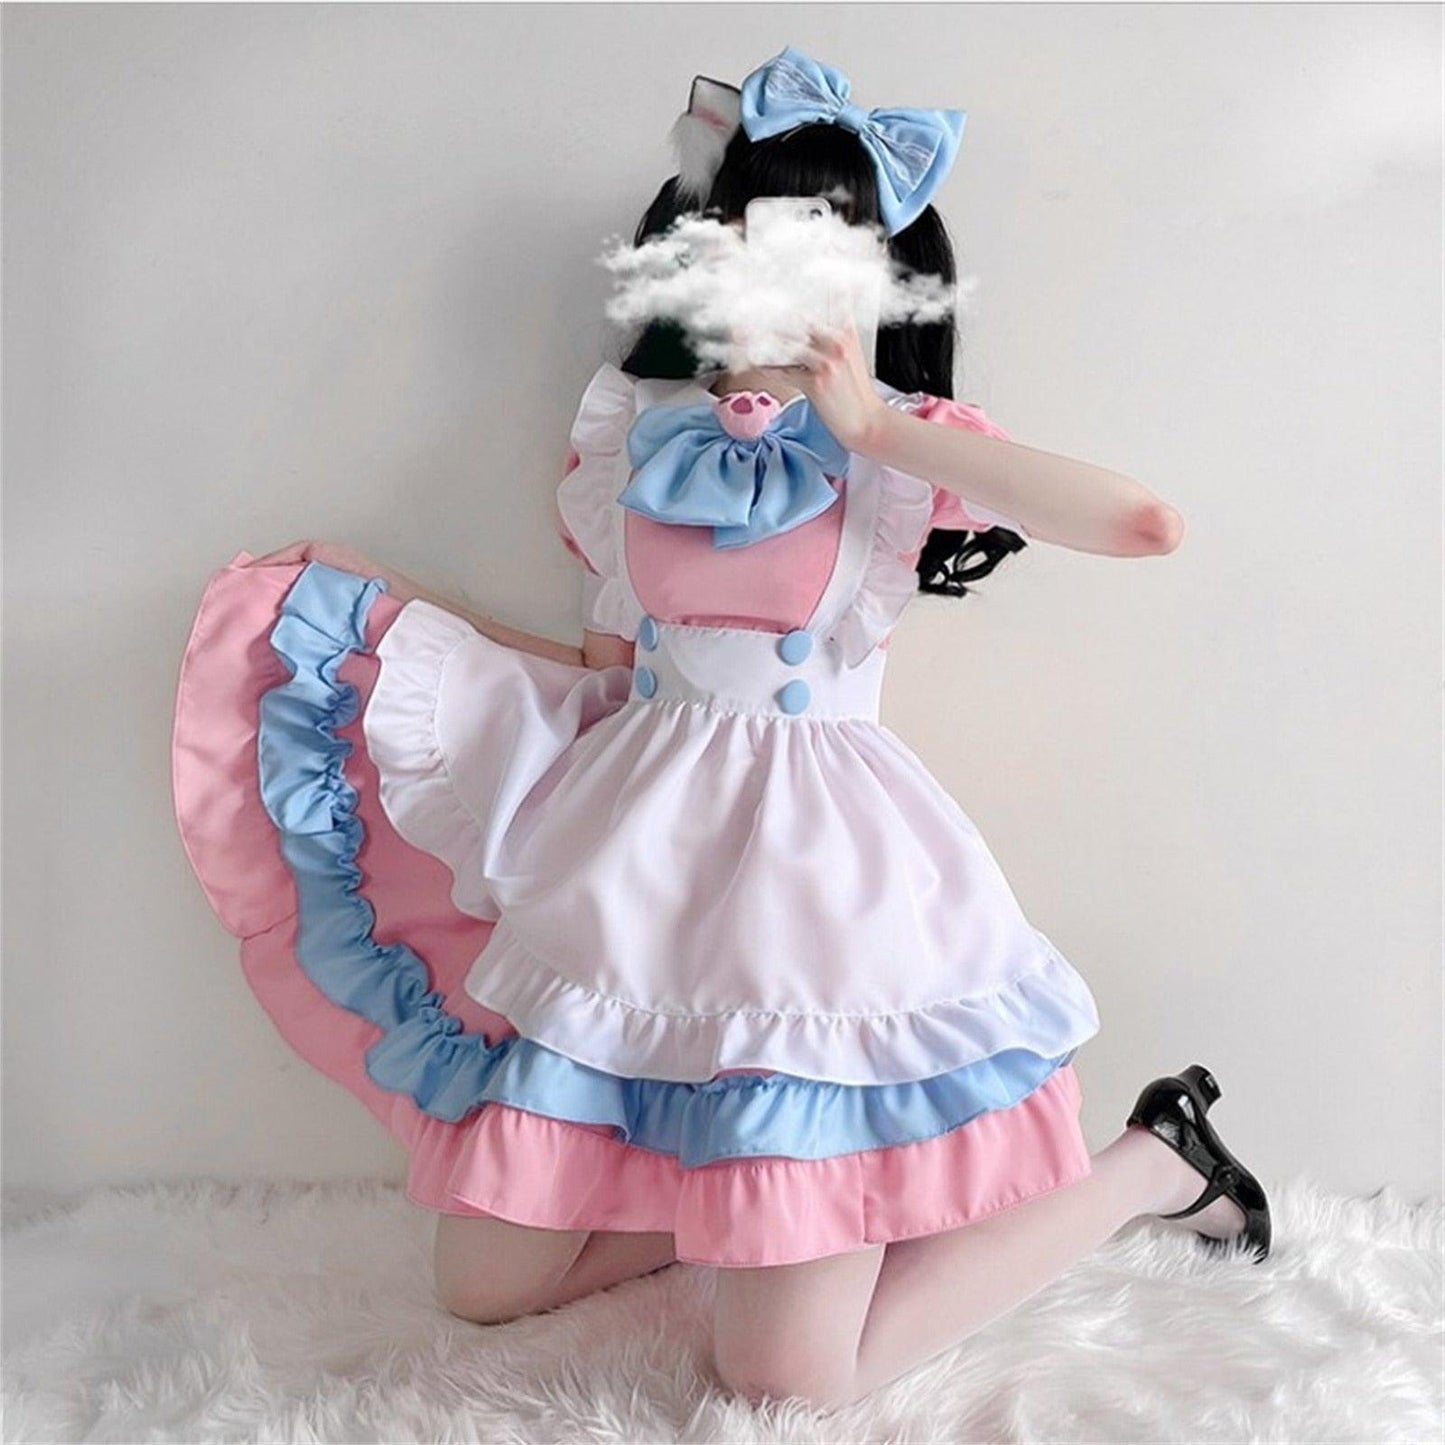 Kawaii Lolita Pink & Blue Maid Outfit - Costumes - Femboy Fatale